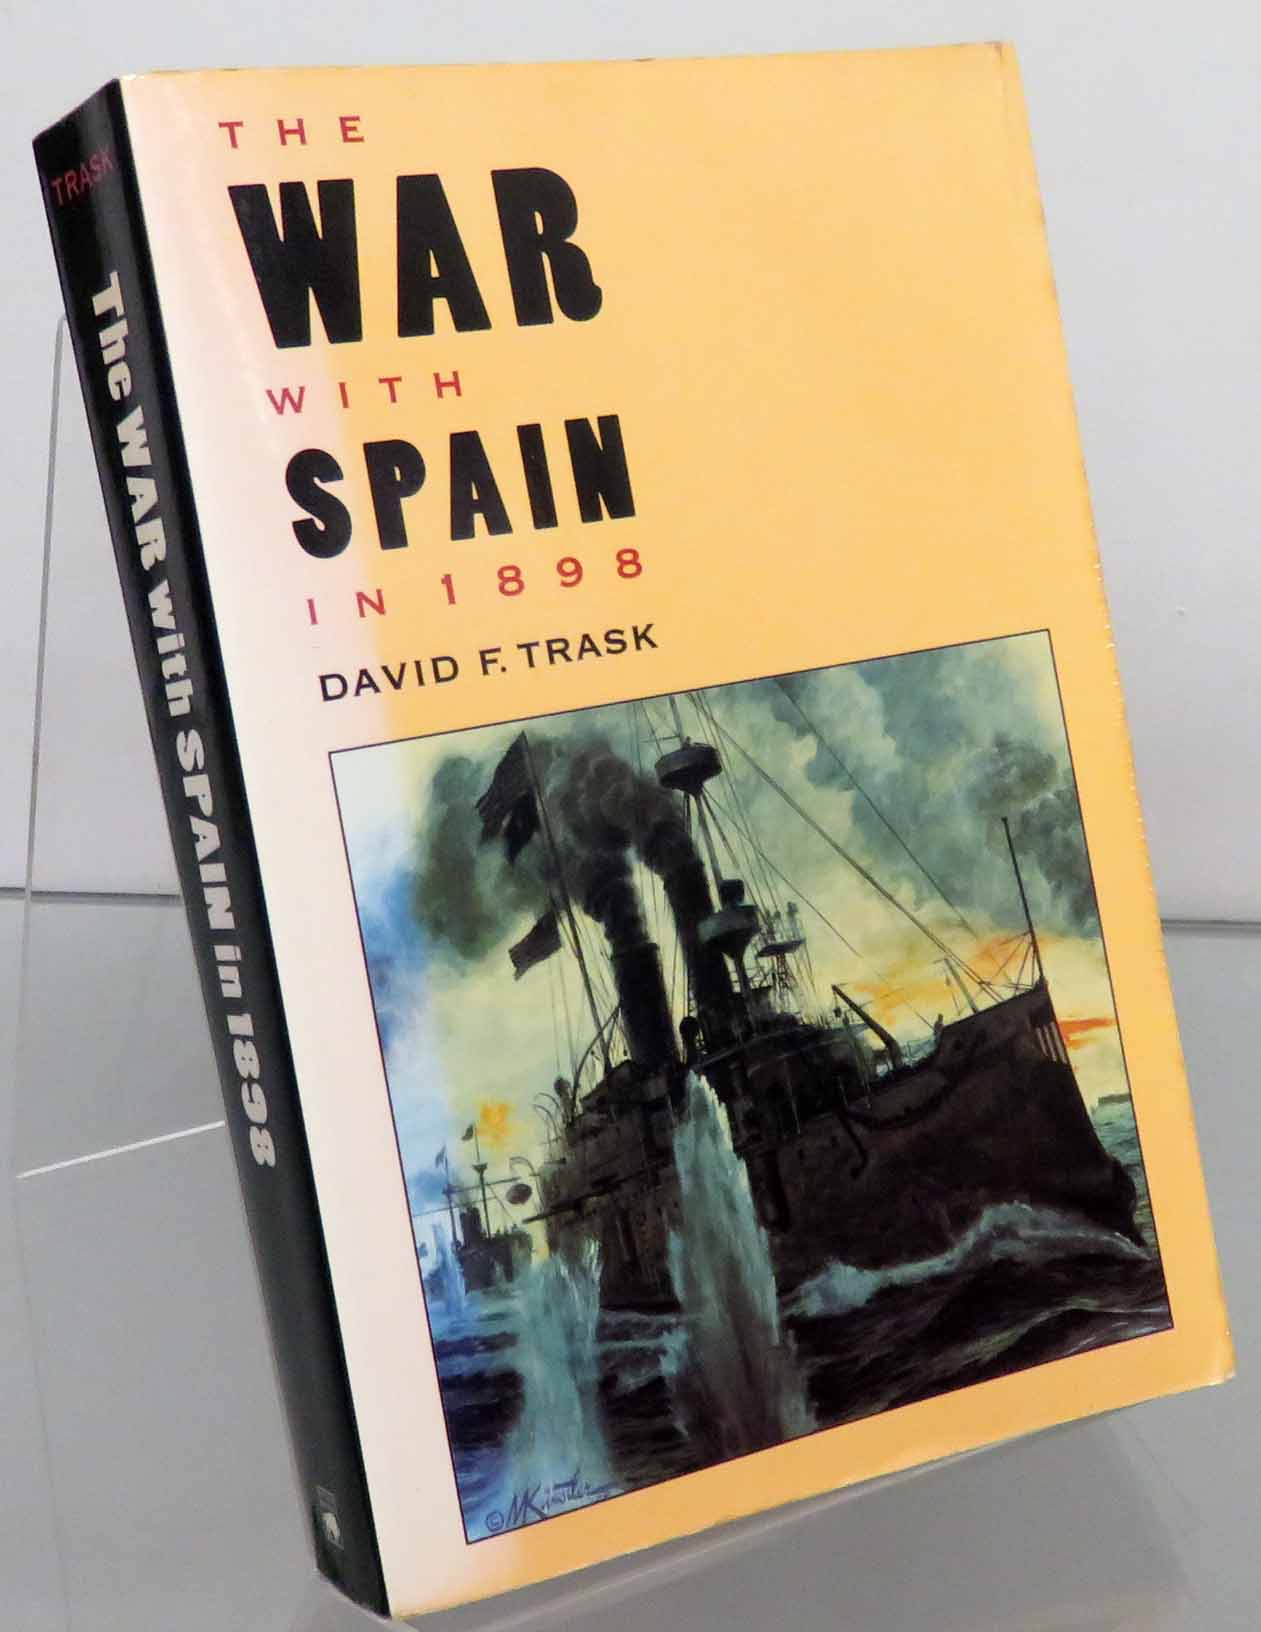 The War With Spain in 1898